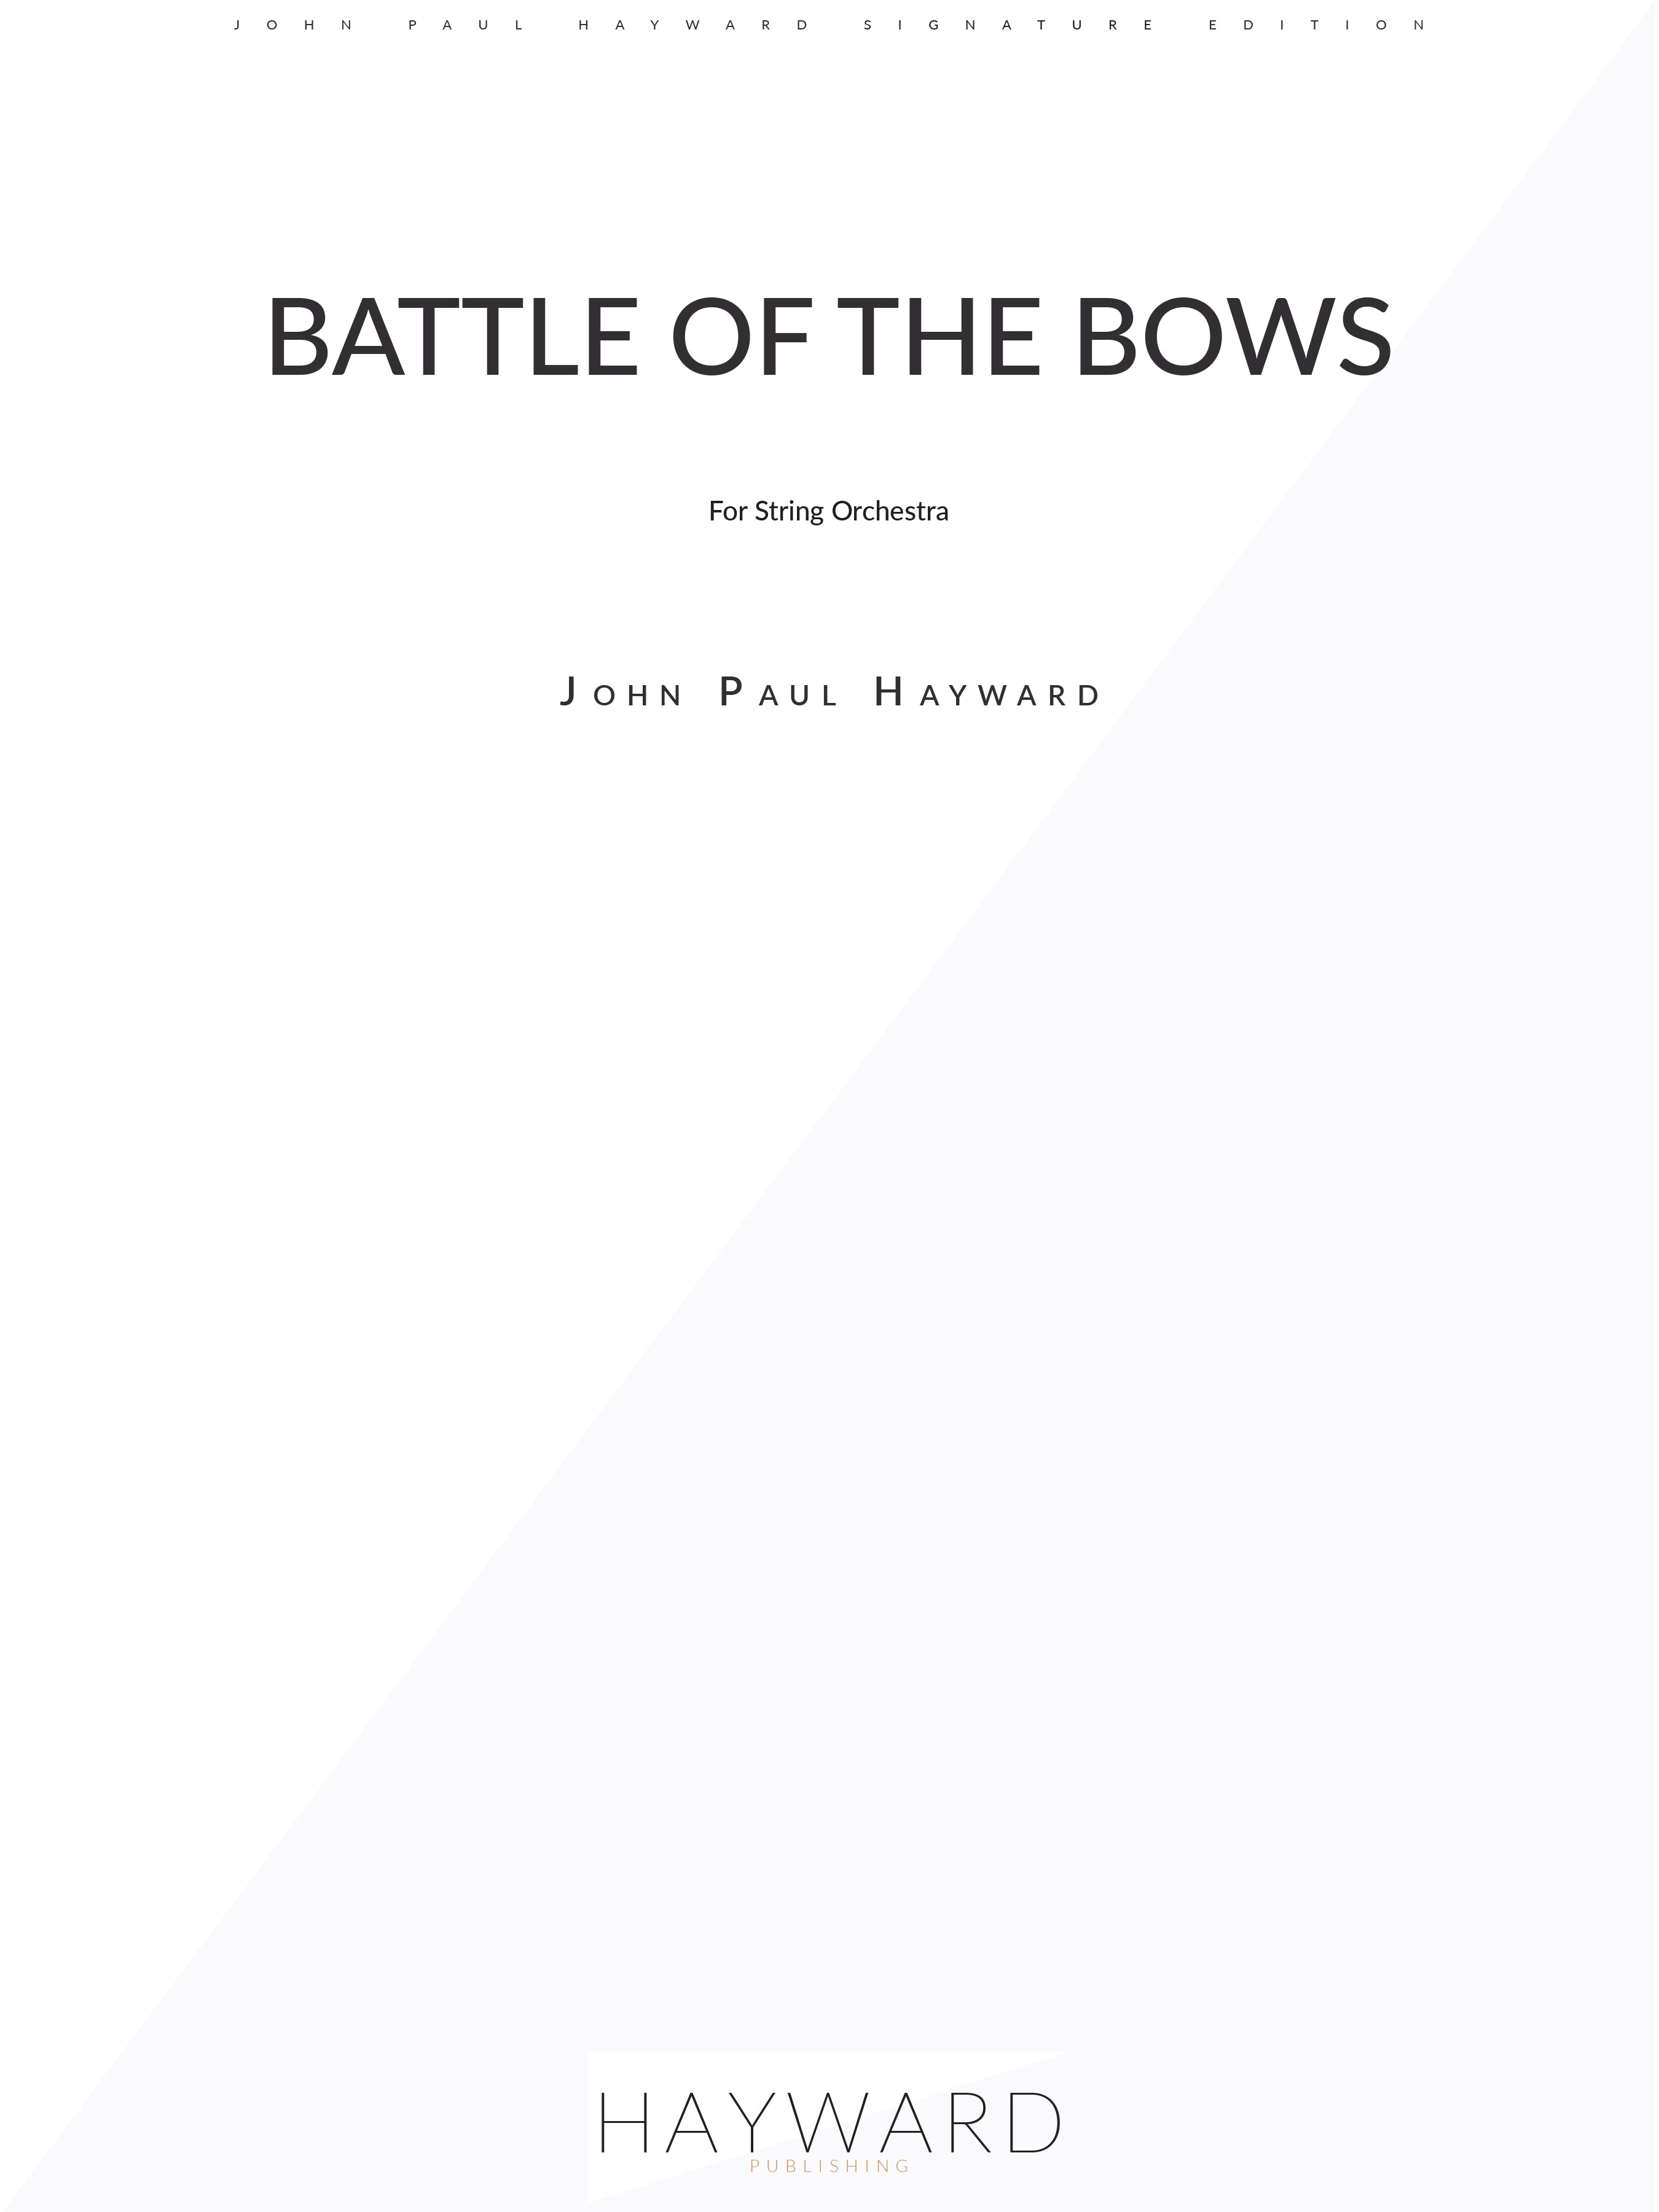 Battle of the Bows